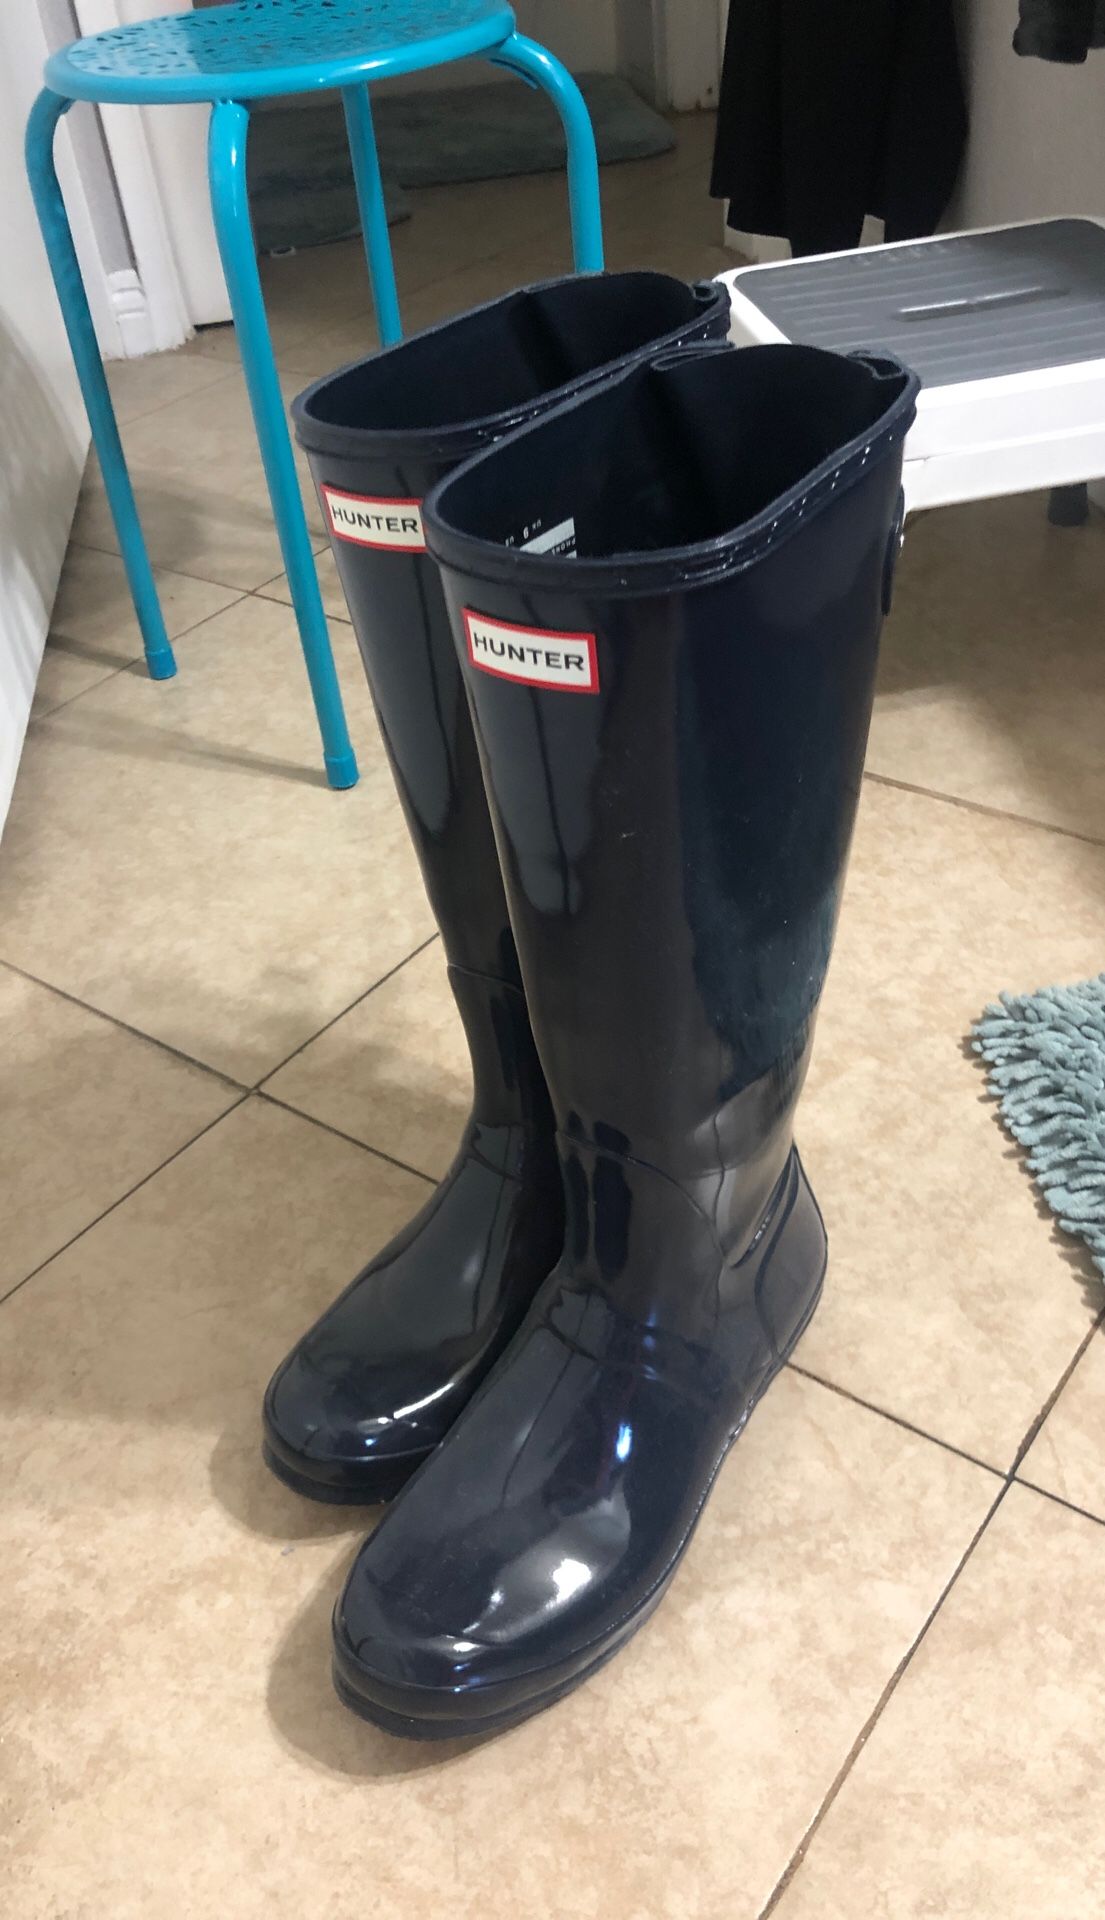 Women’s size 11 Hunter rain and snow boots